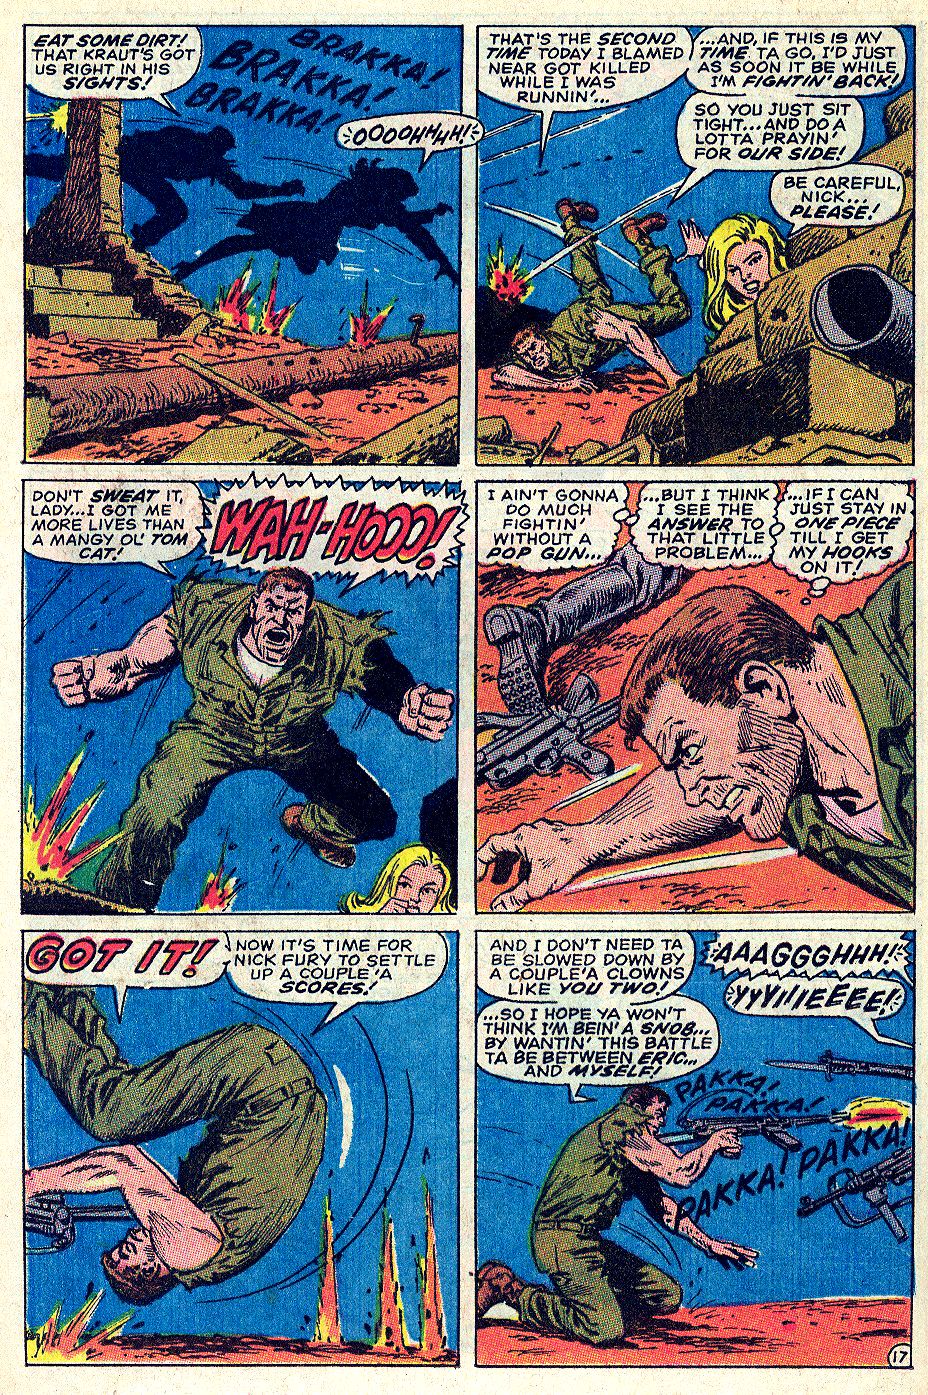 Read online Sgt. Fury comic -  Issue #66 - 24